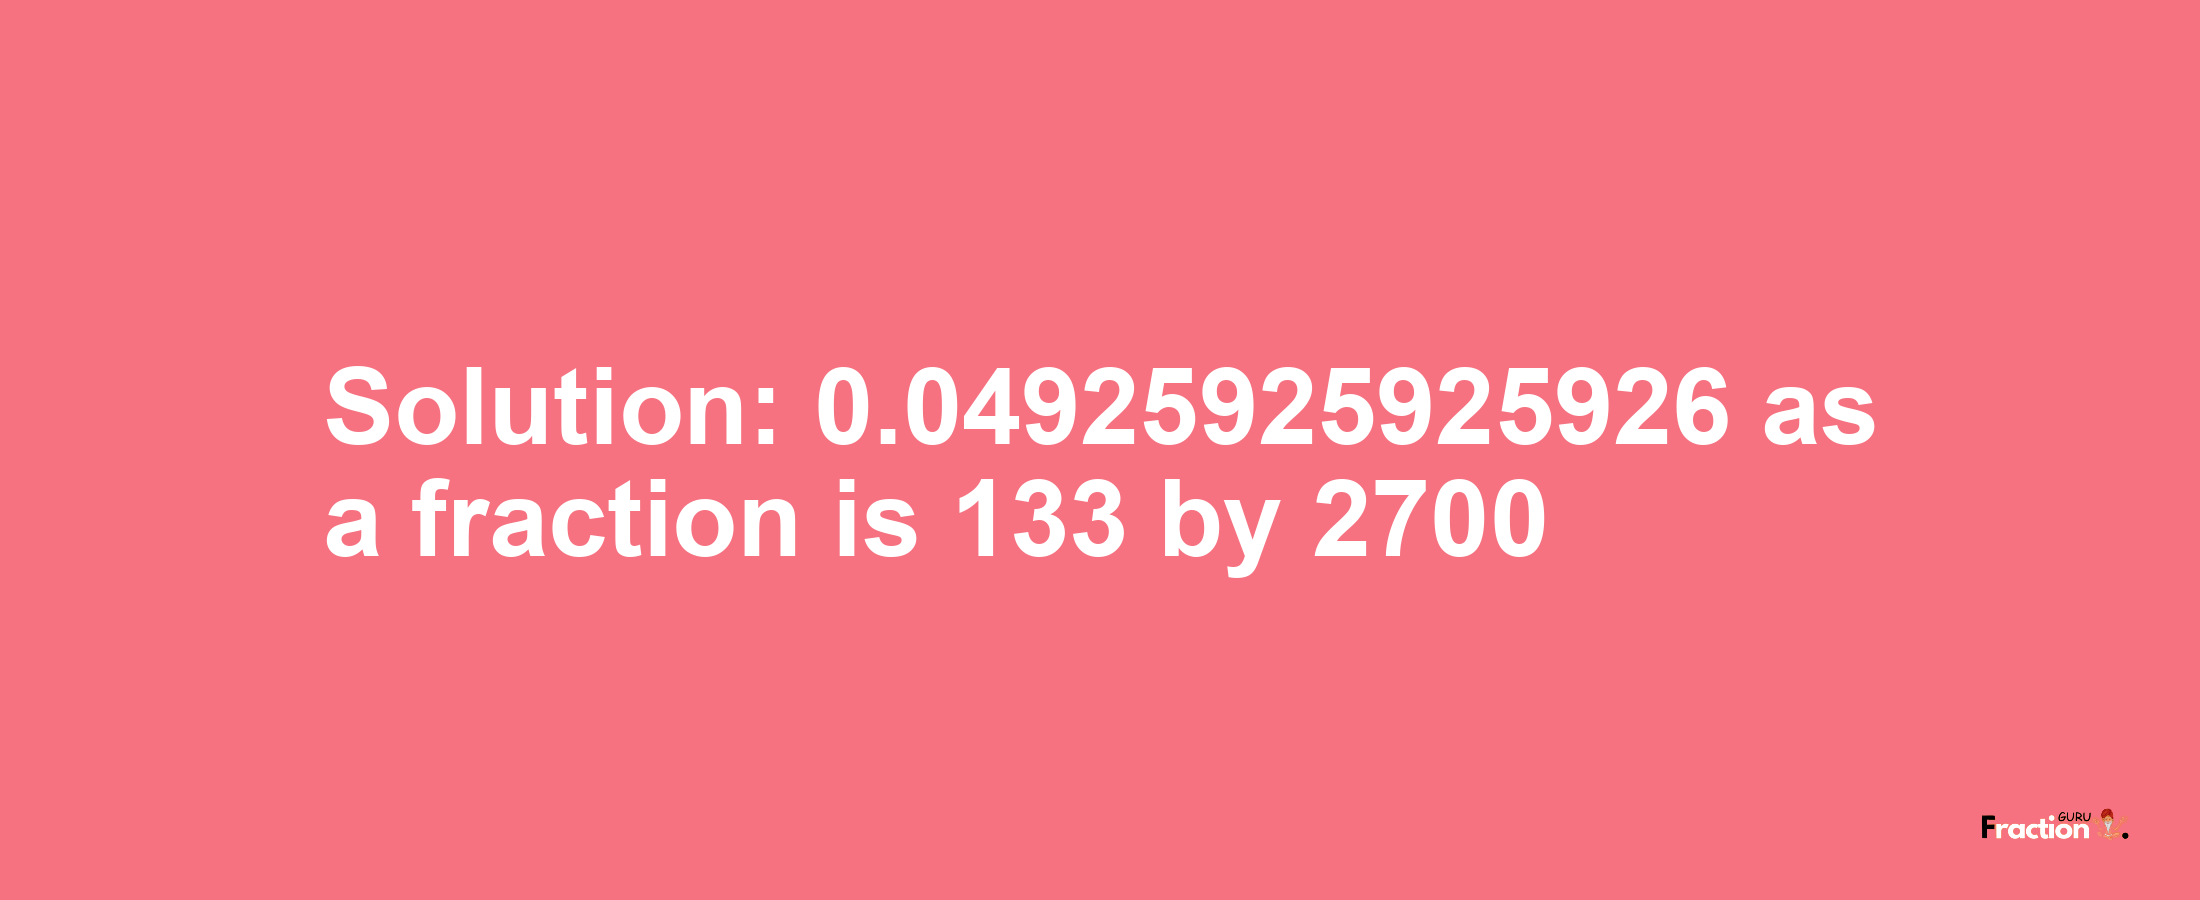 Solution:0.04925925925926 as a fraction is 133/2700